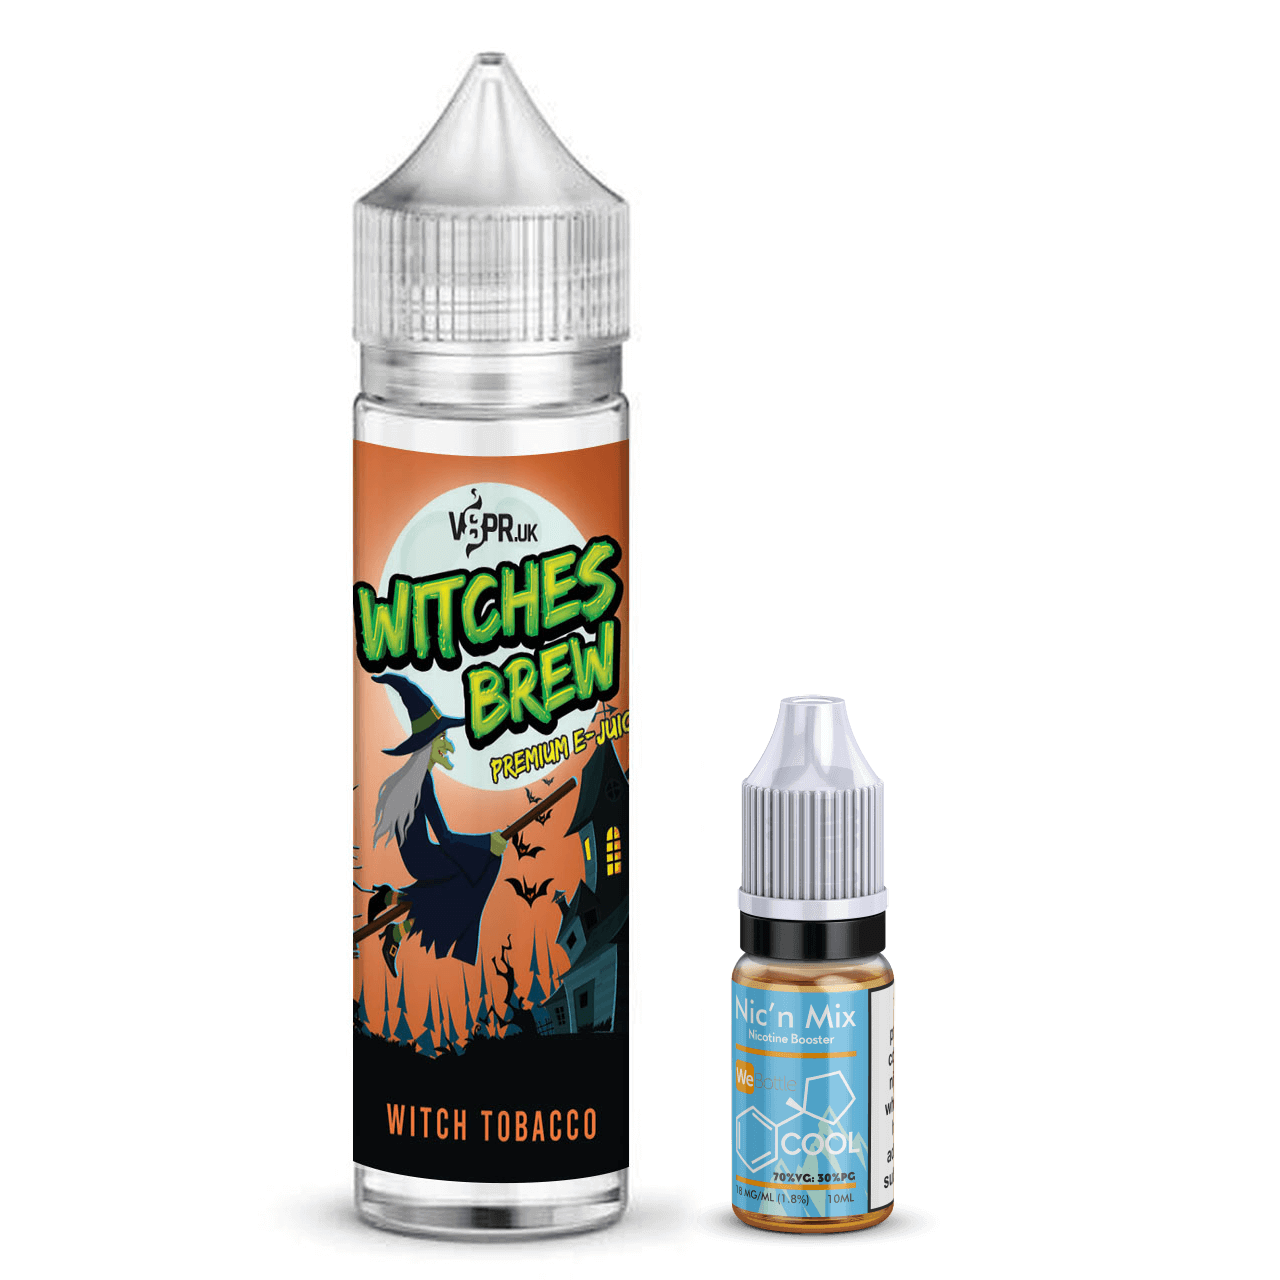 Witches Brew Witch Tobacco Shortfill eJuice - 50ml - V8PR.uk